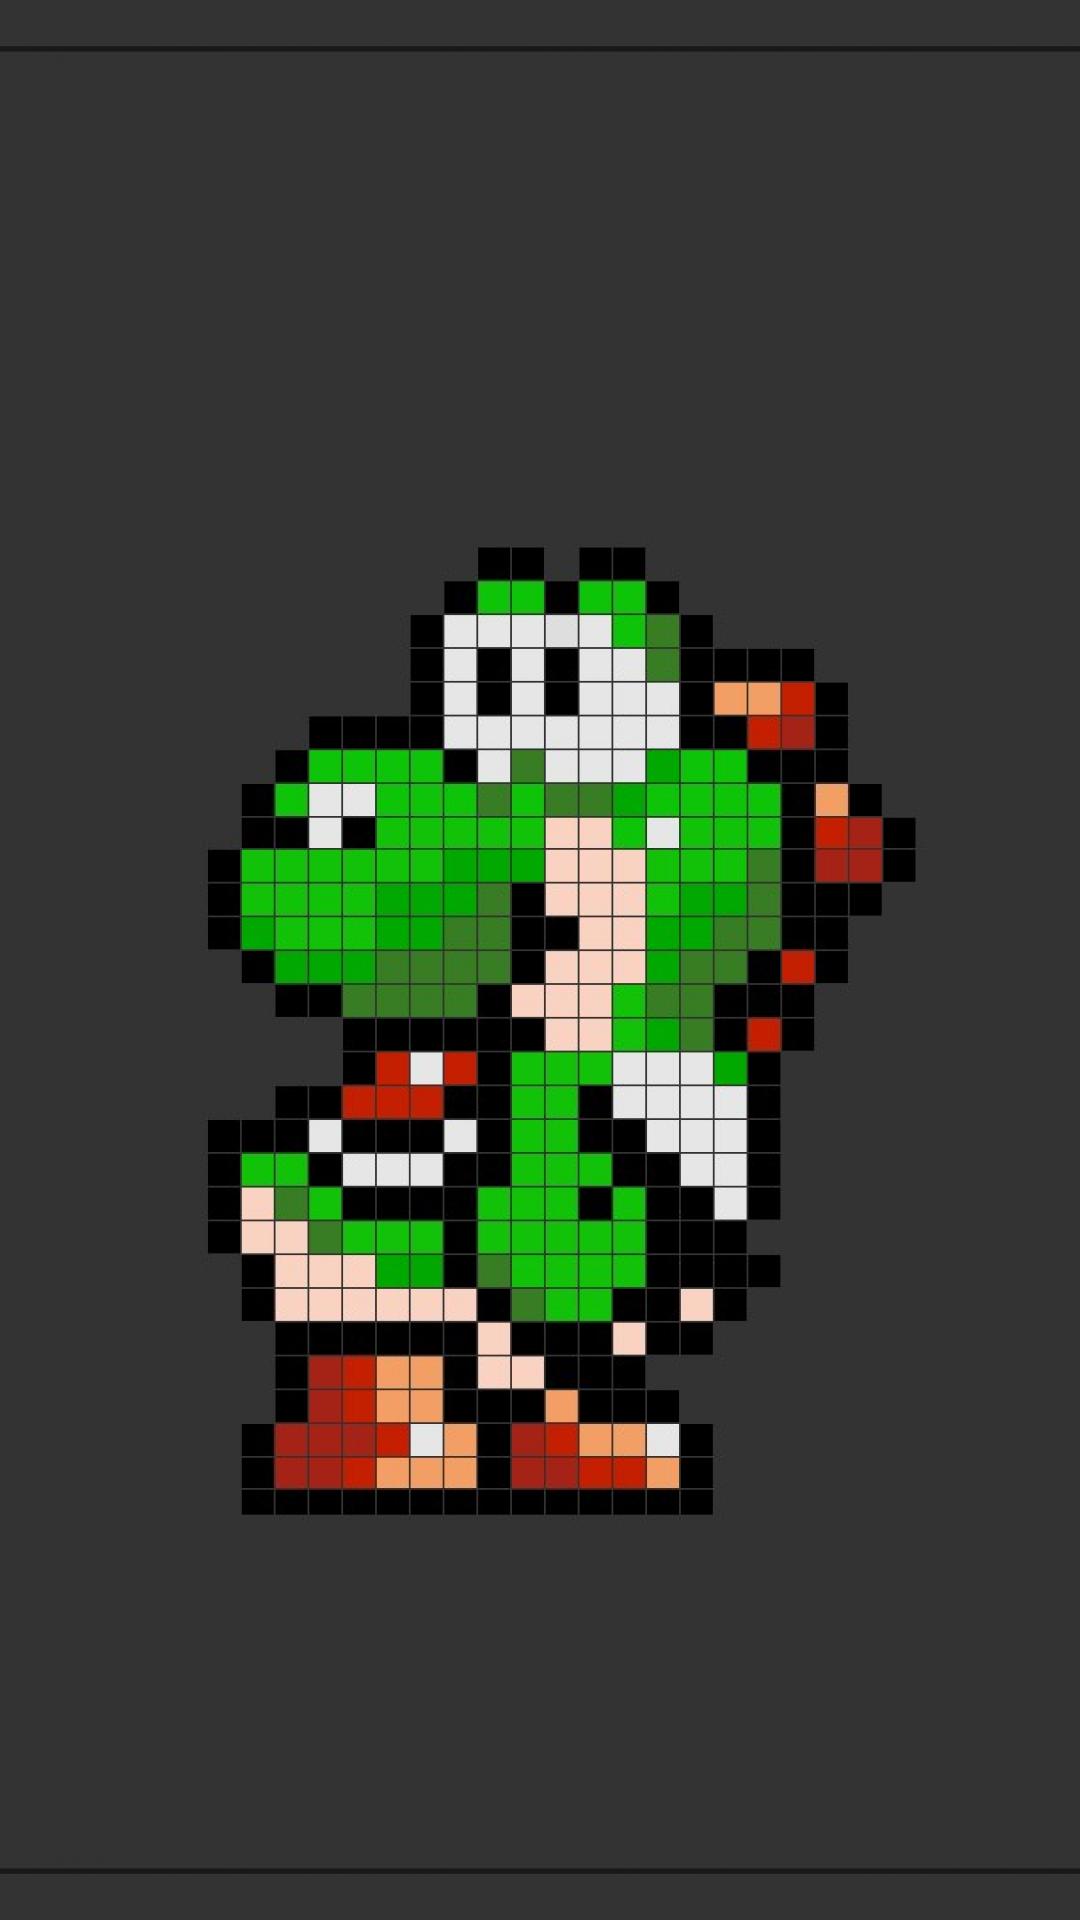 8 bit video game wallpapers for iPhone and iPad